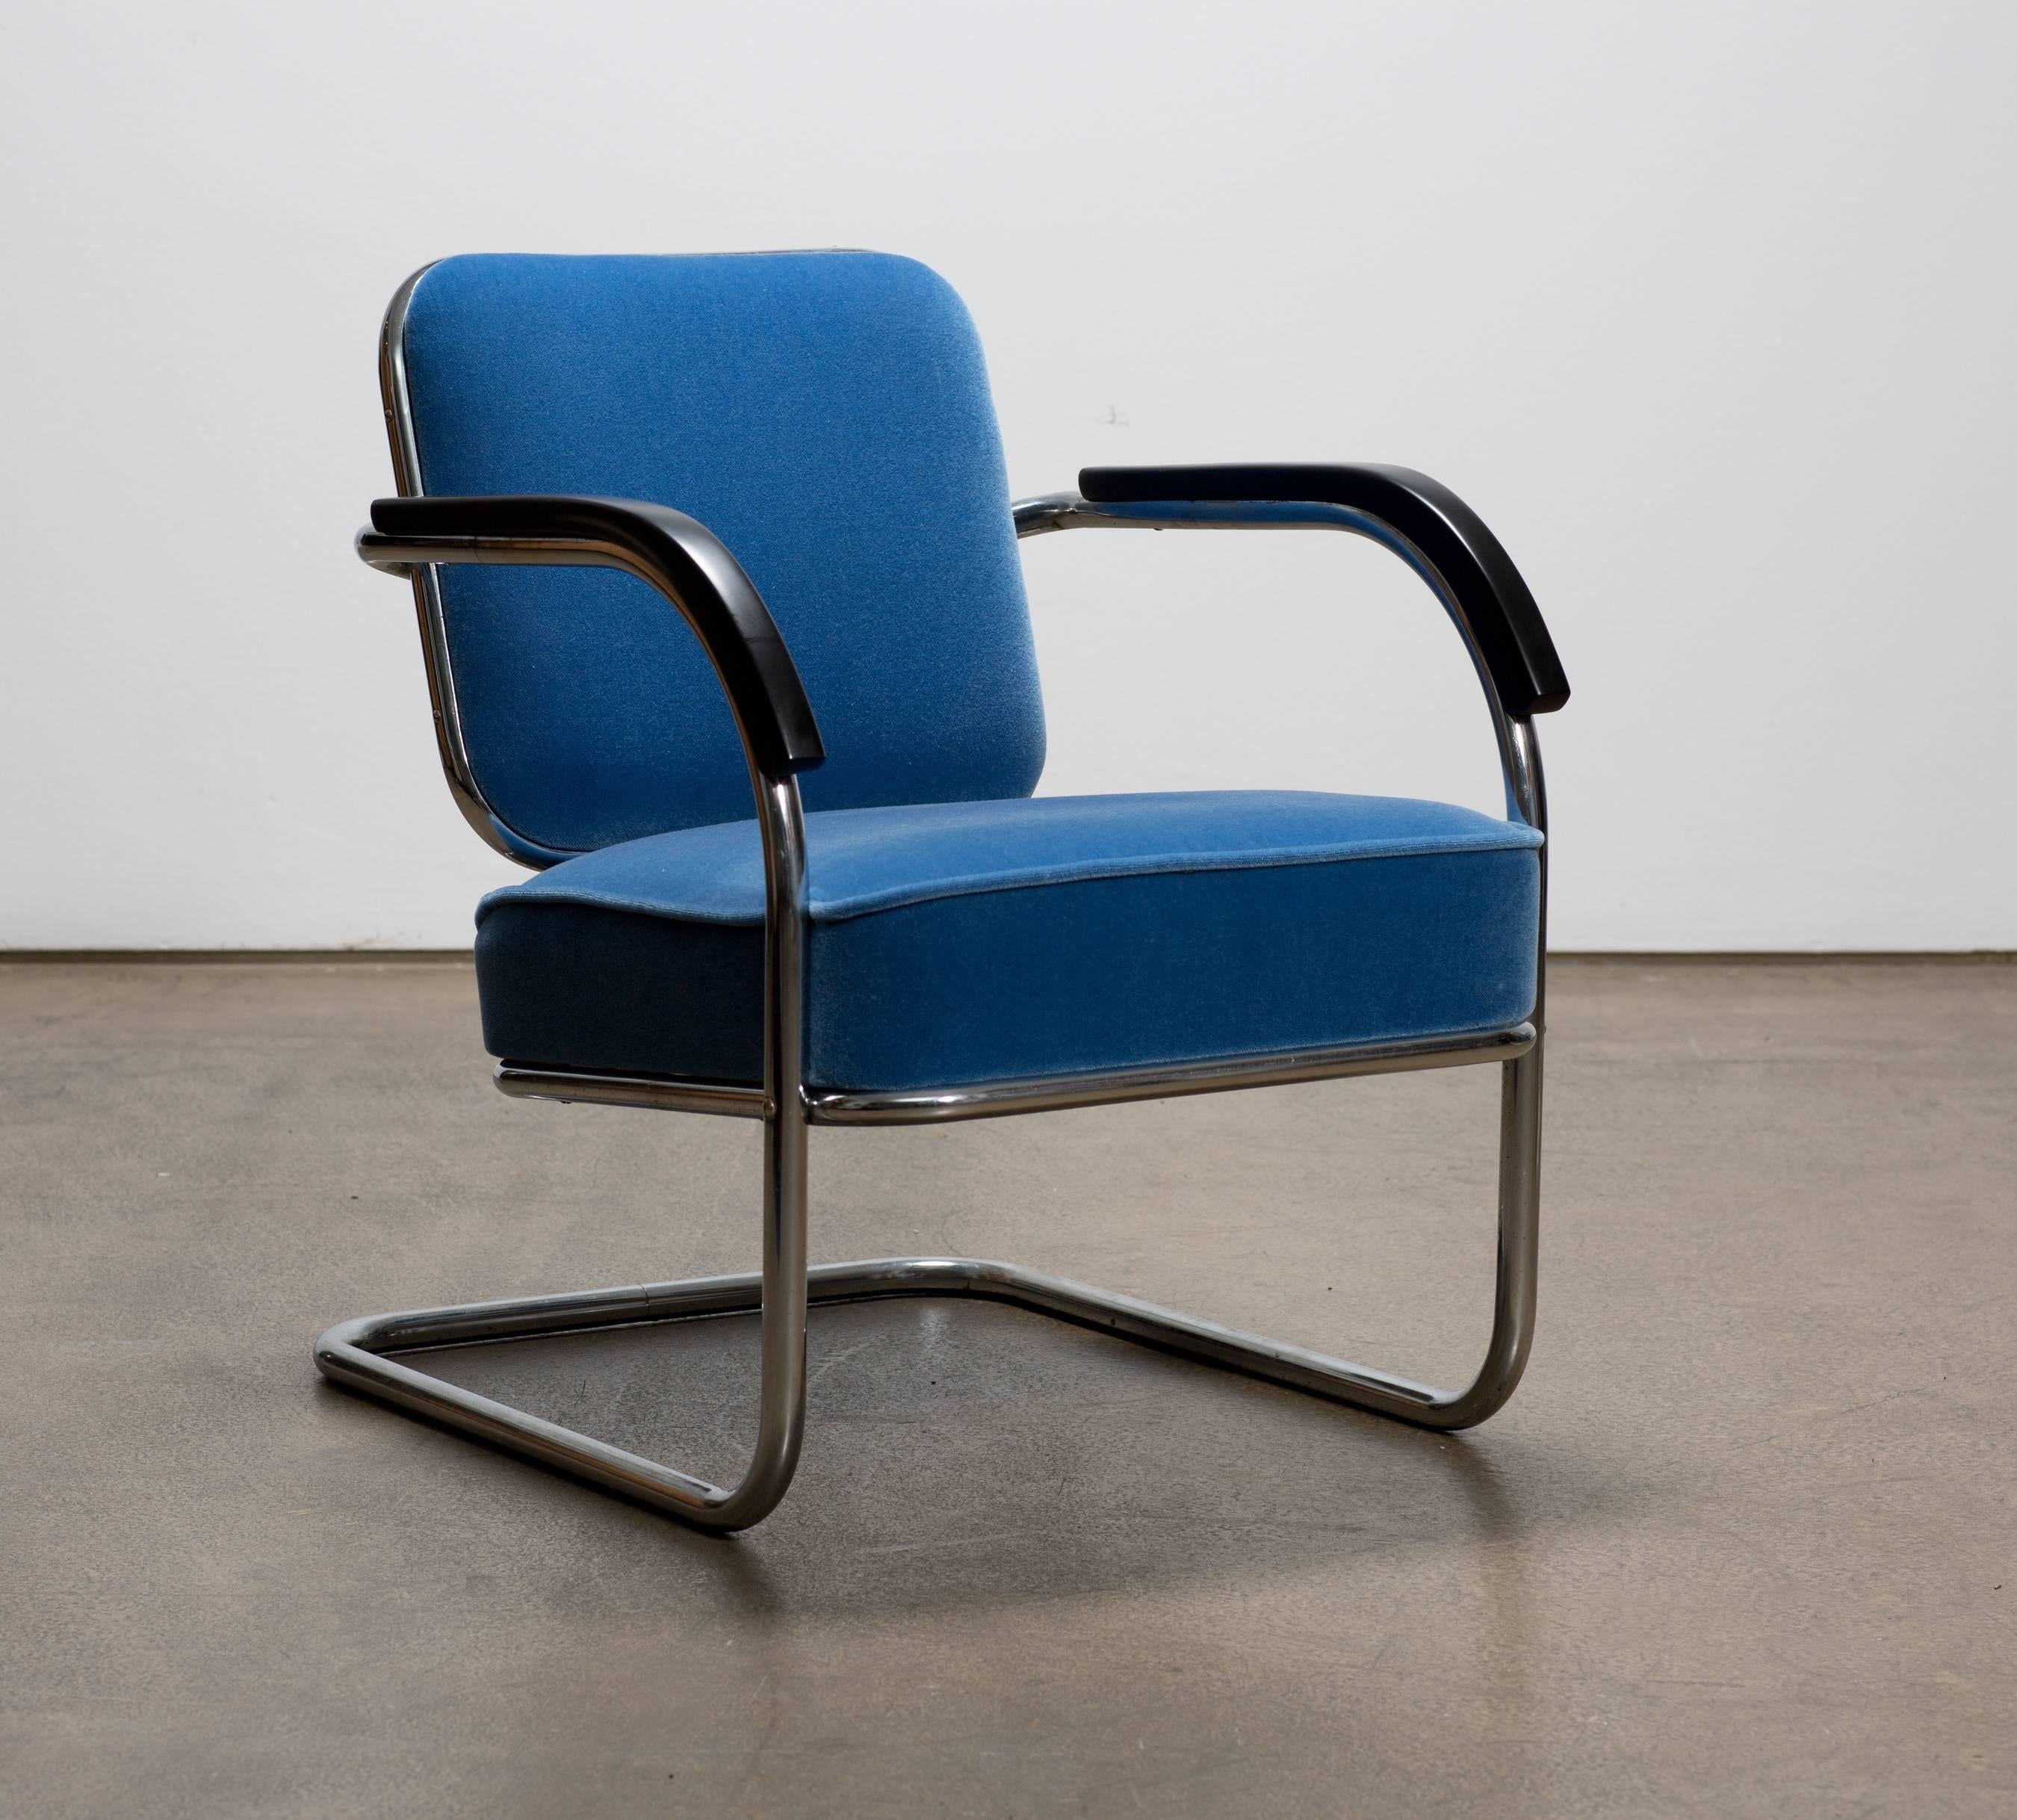 A pair of original tubular steel armchairs from the 1930s. The swedish cantilever armchairs have a tubular steel frame and are upholstered with a light blue Mohair fabric.
The original armrests are made from beech and are lacquered black with a matt